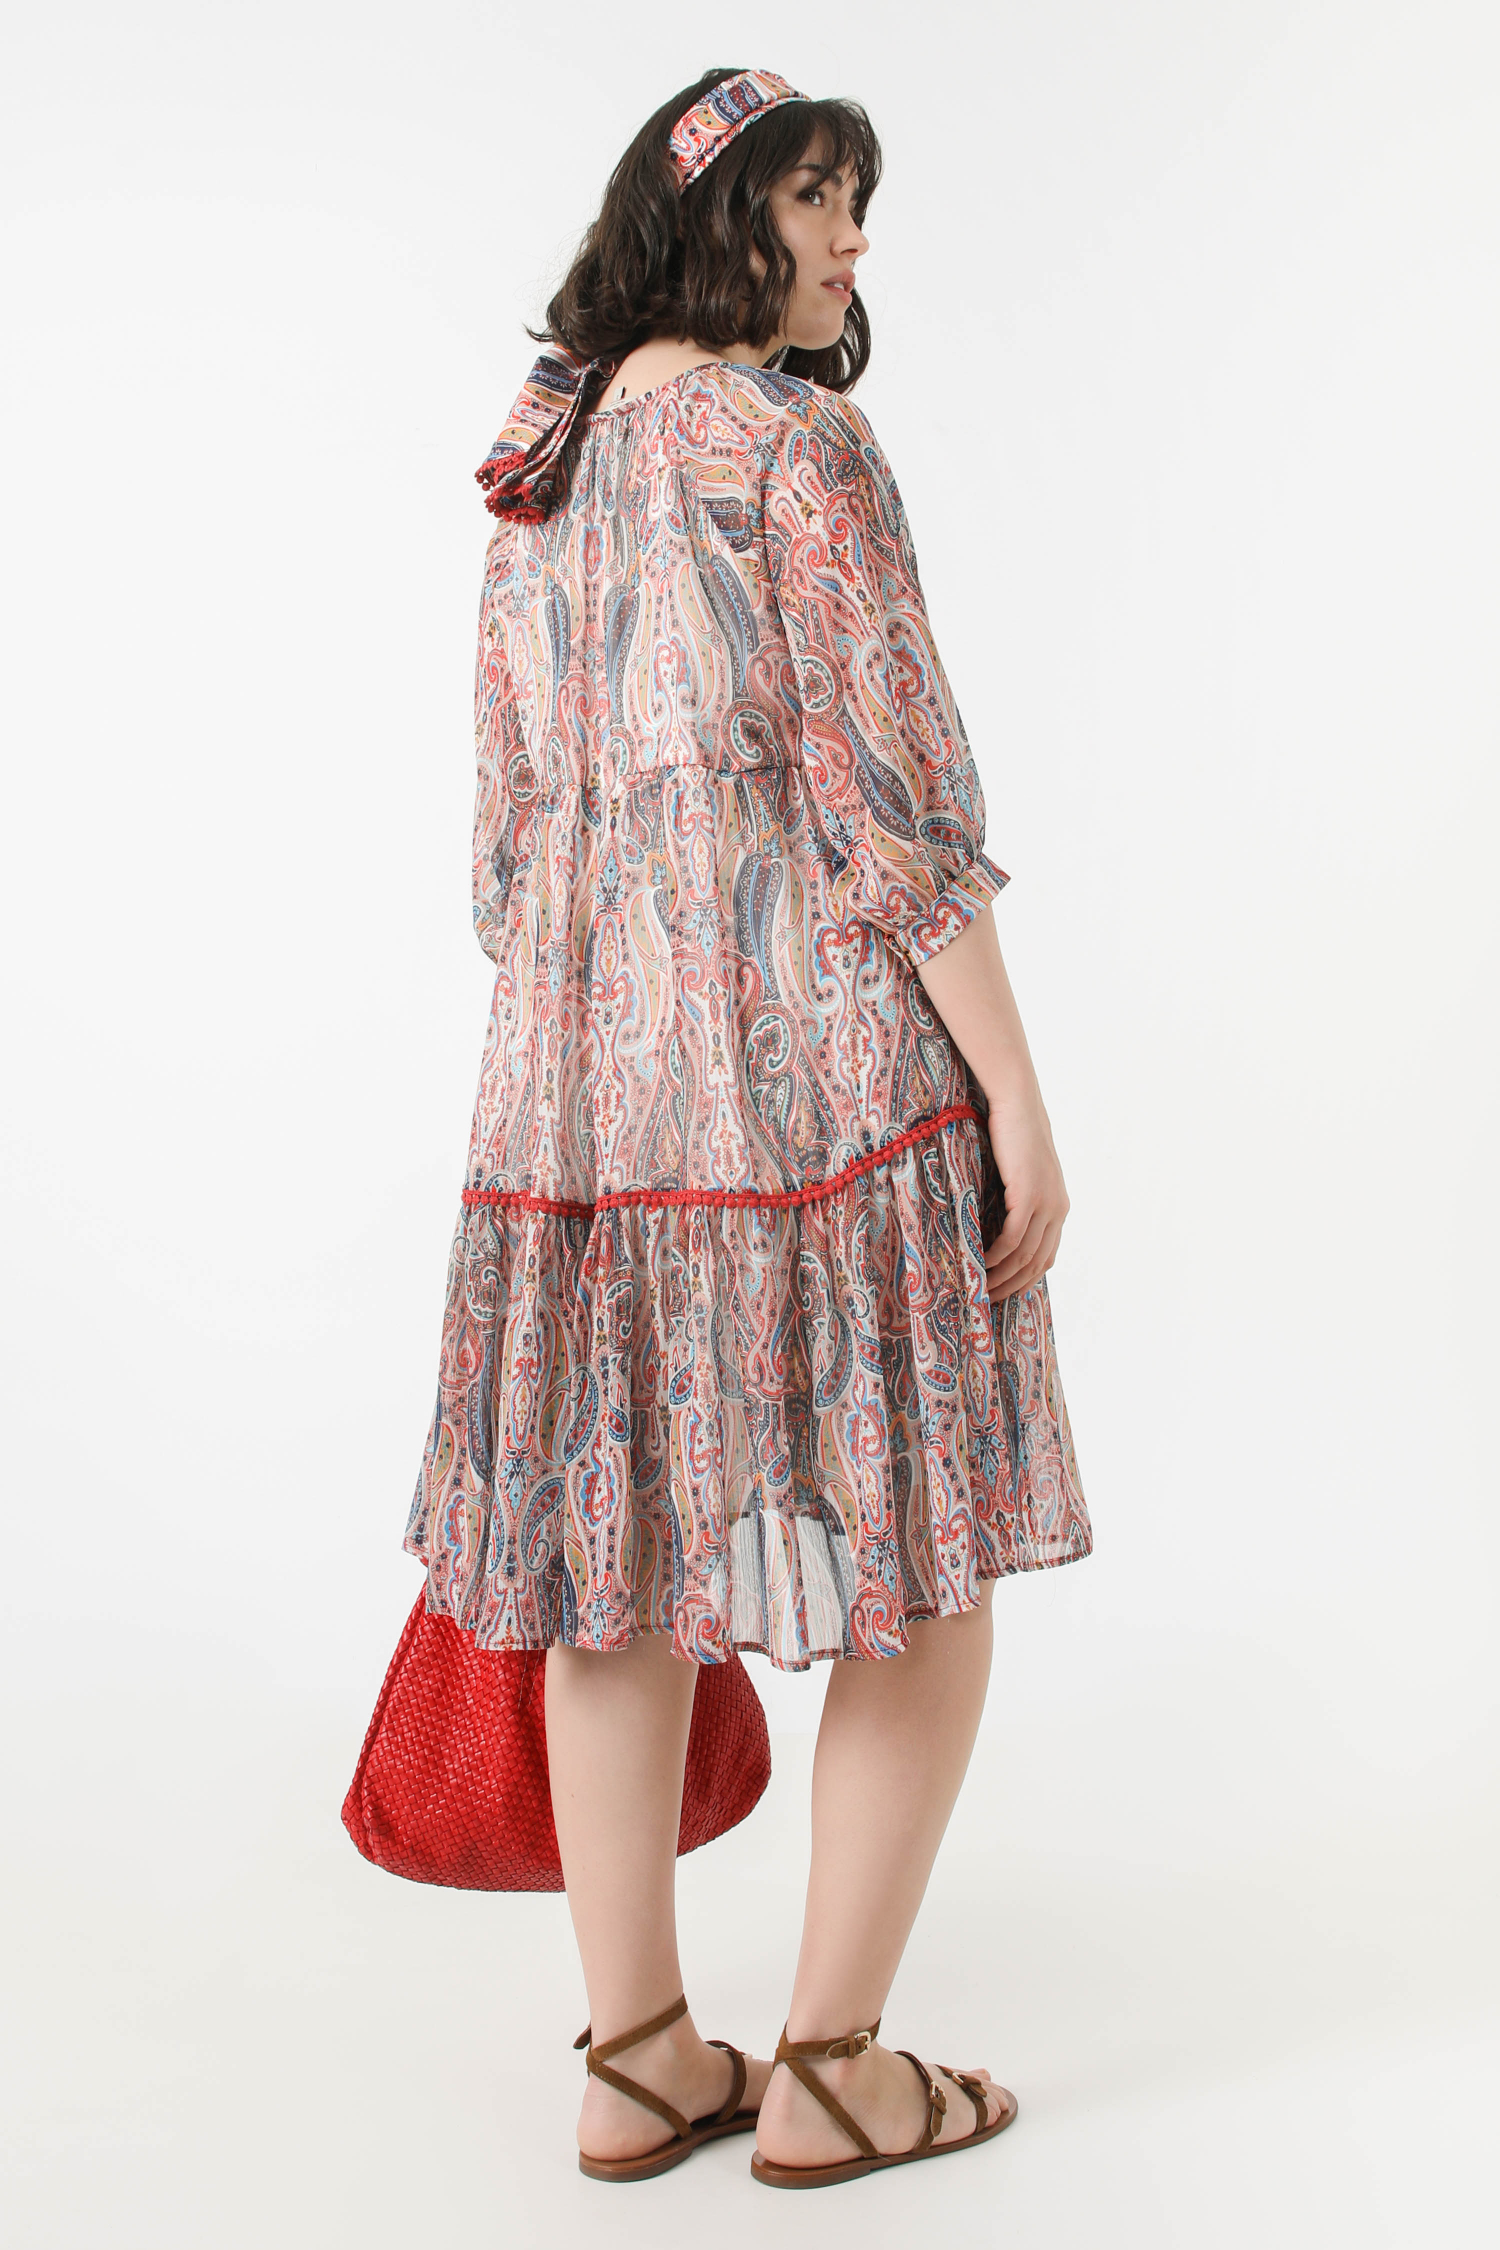 mid-length dress in floral print voile éco-responsable fabric